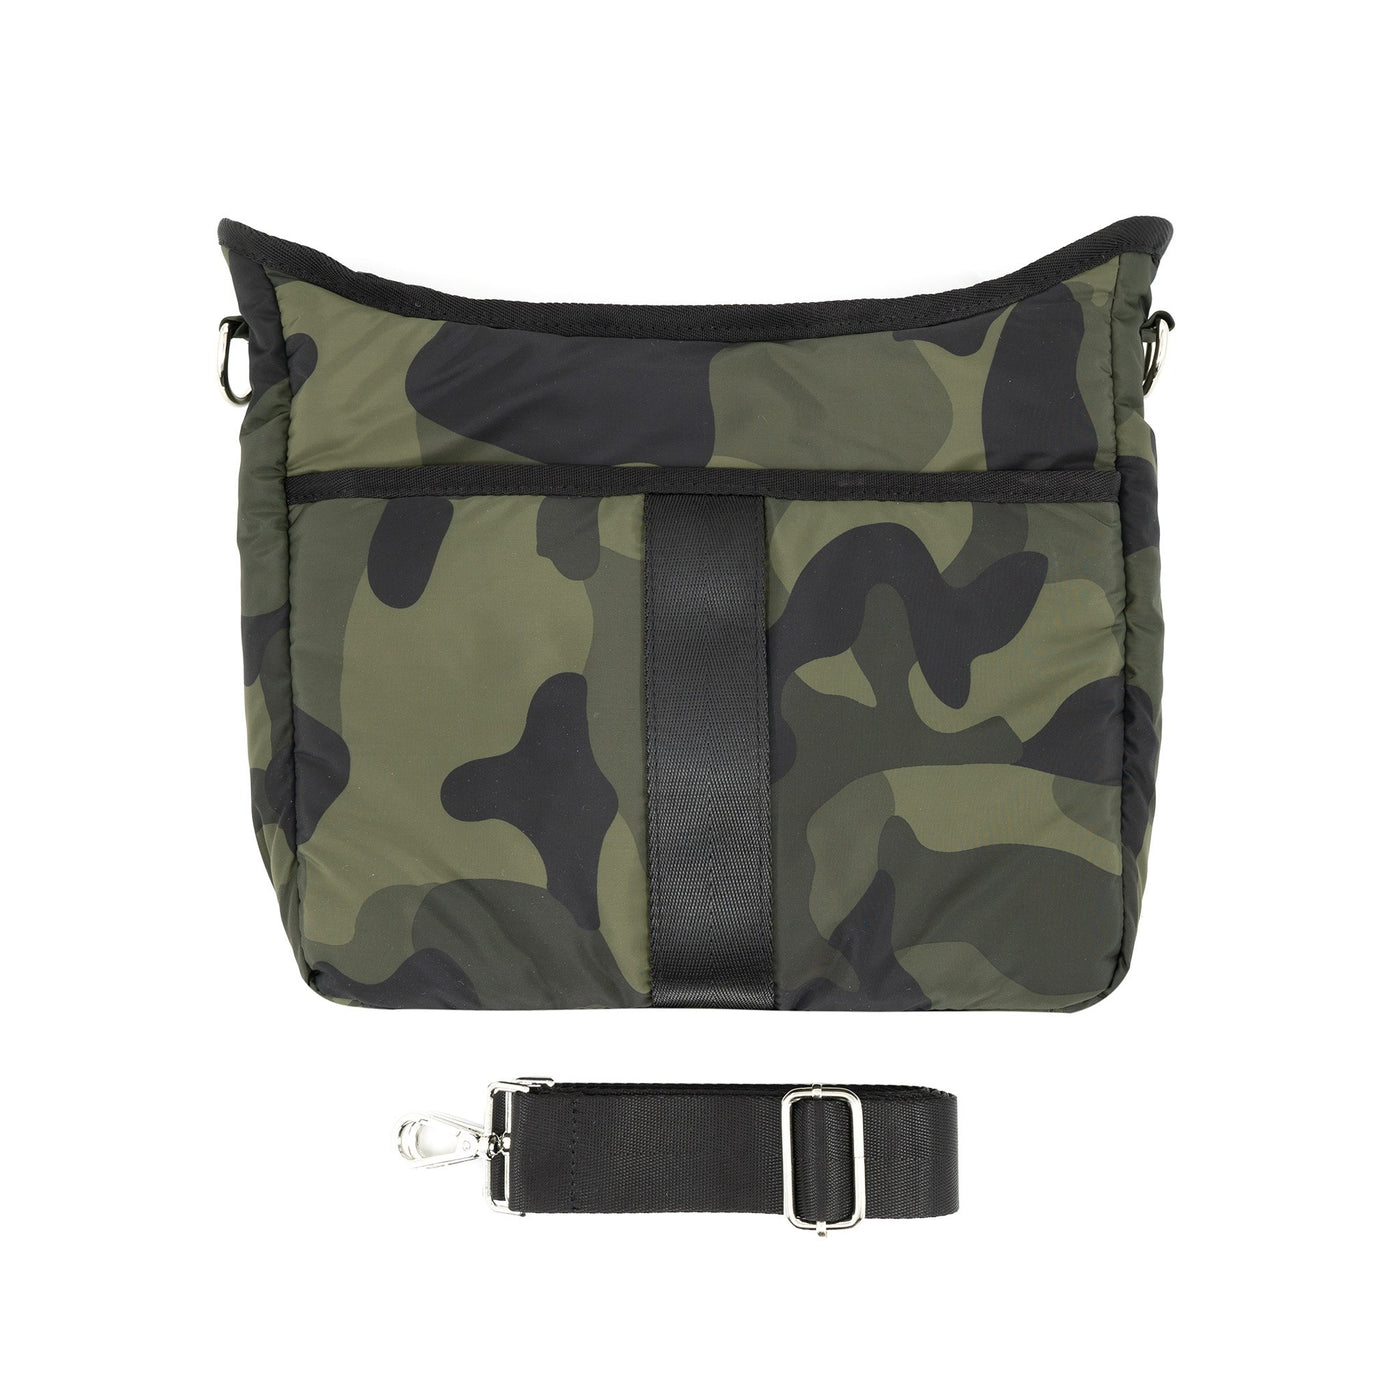 Puffy Nylon Crossbody with Changeable Strap - Green Camo